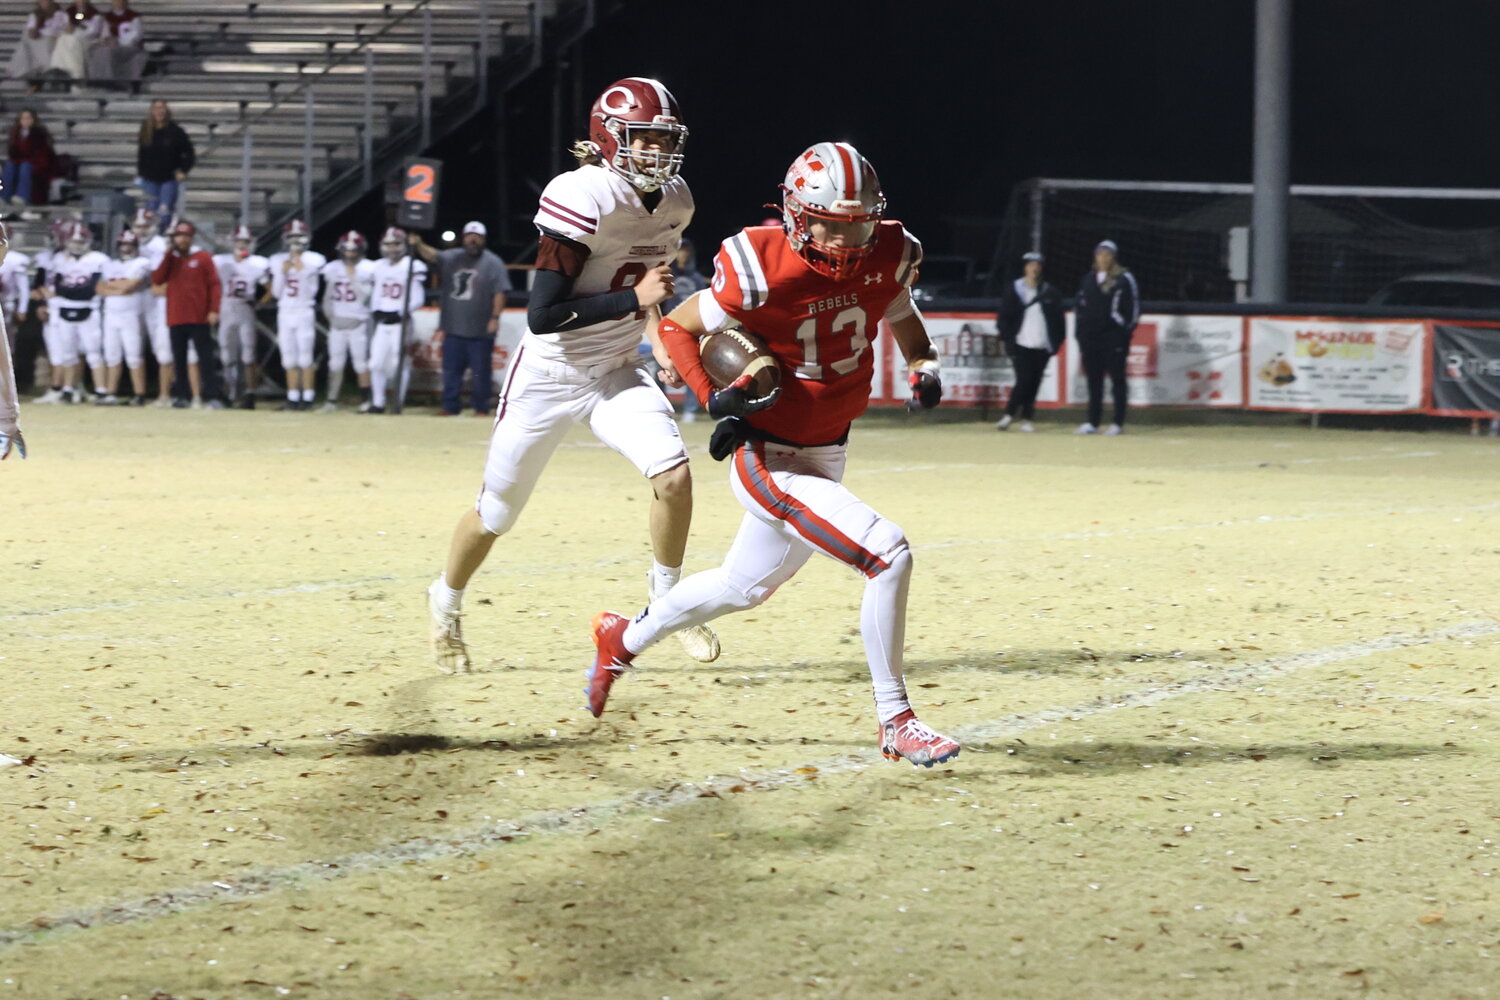 Stafford Roditis runs for a touchdown for the McKenzie Rebels.